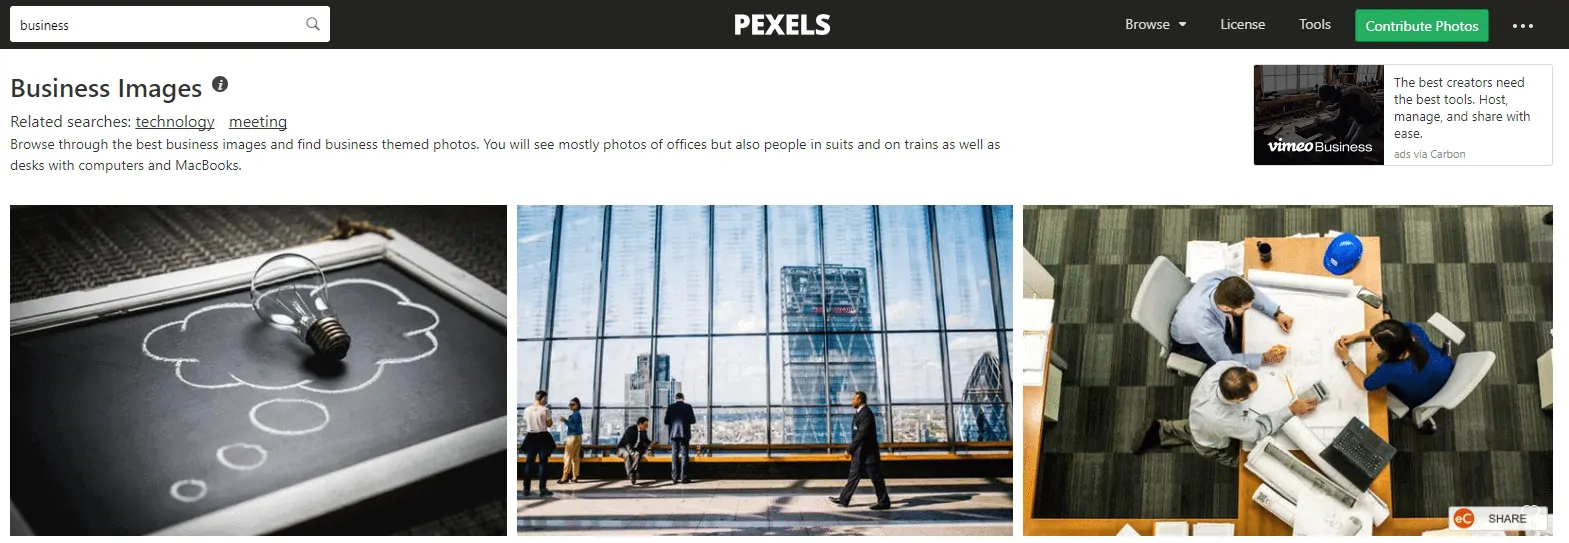 pexels-home-page